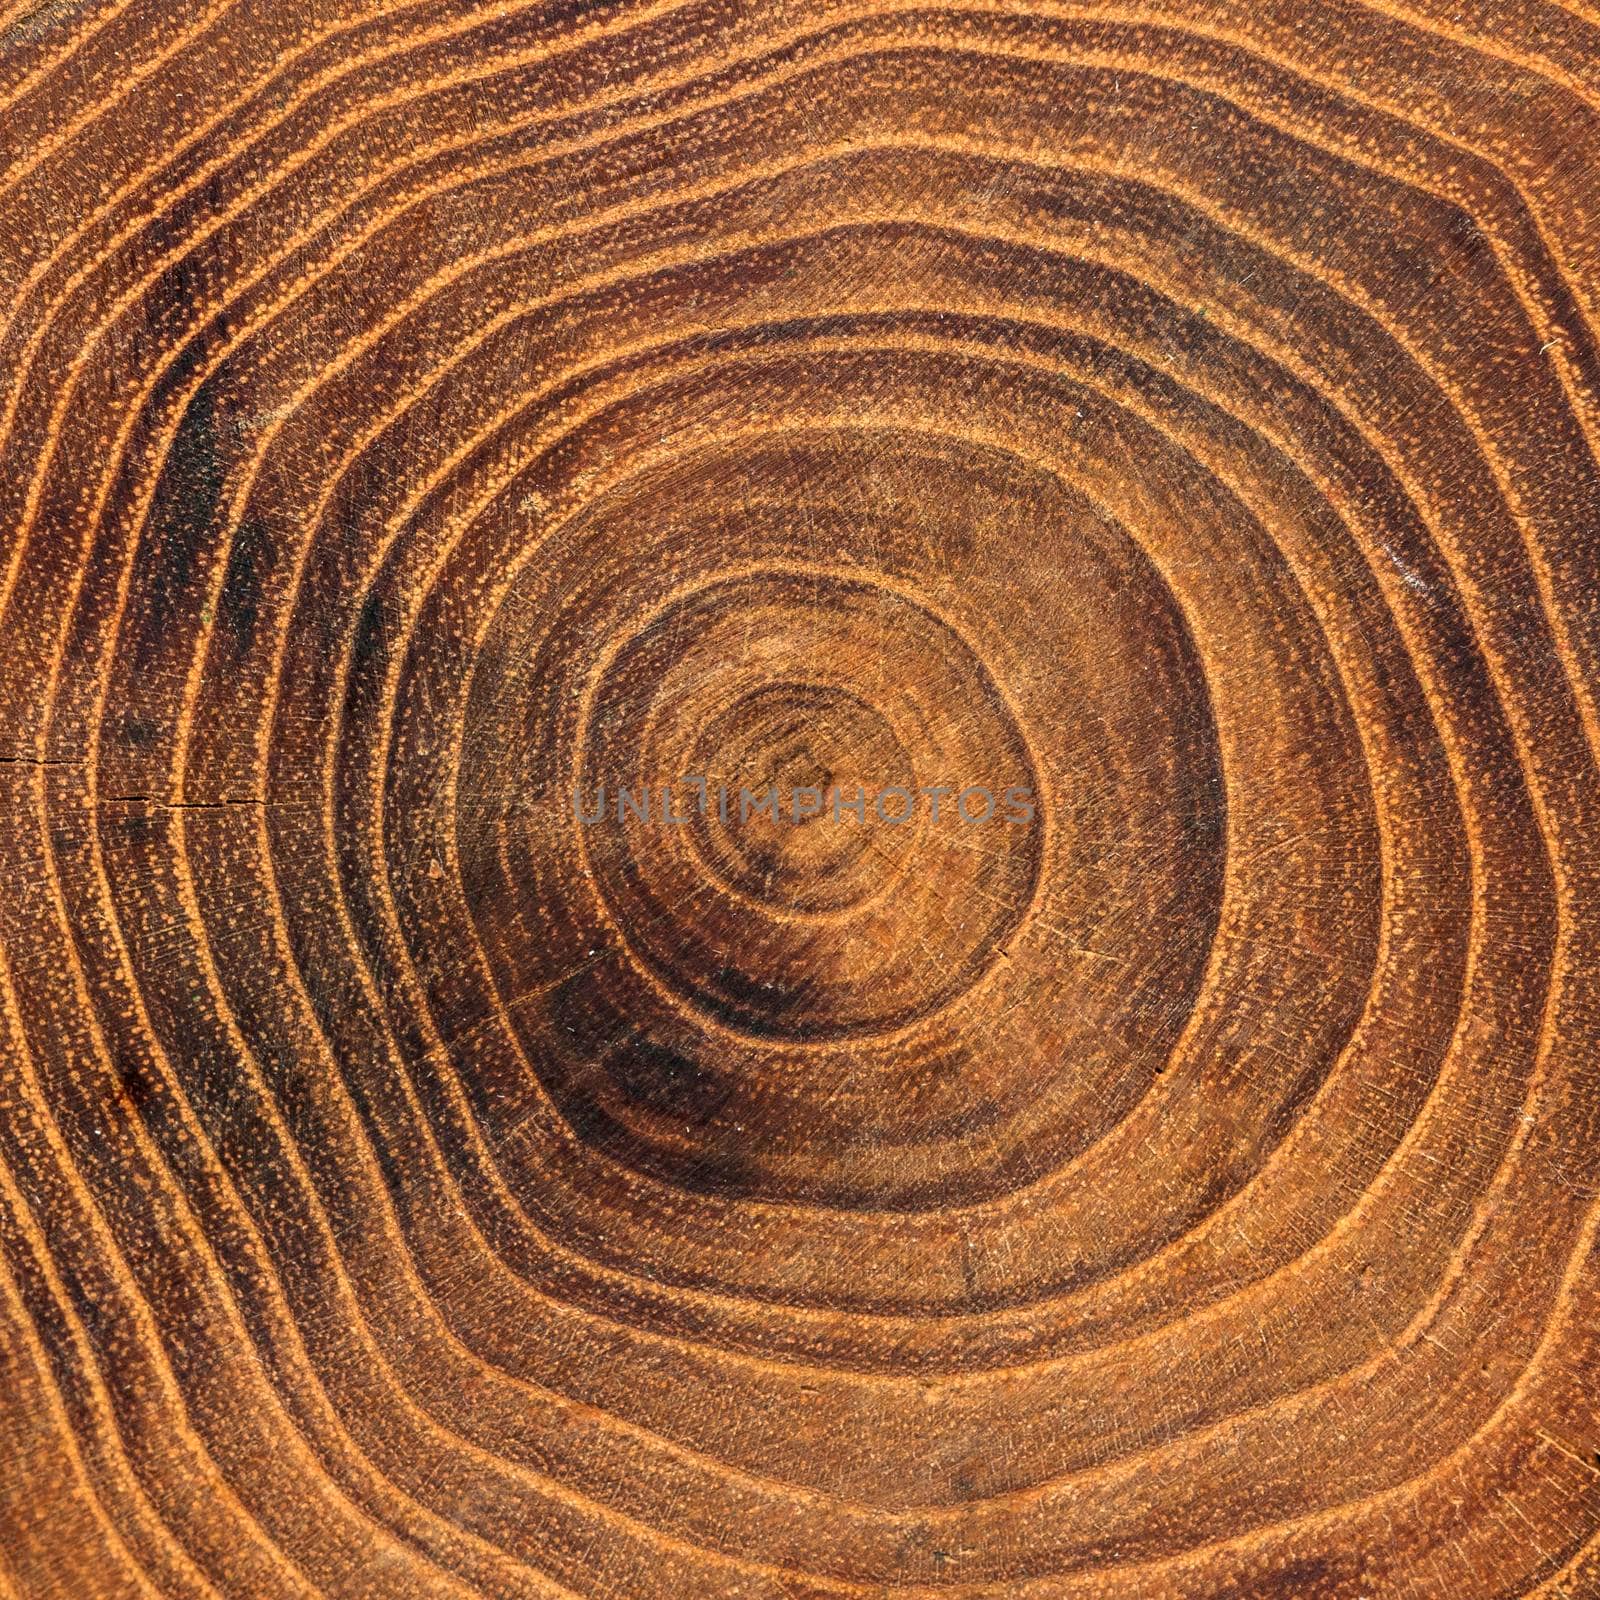 close up wooden annual growth rings. High quality photo by Zahard